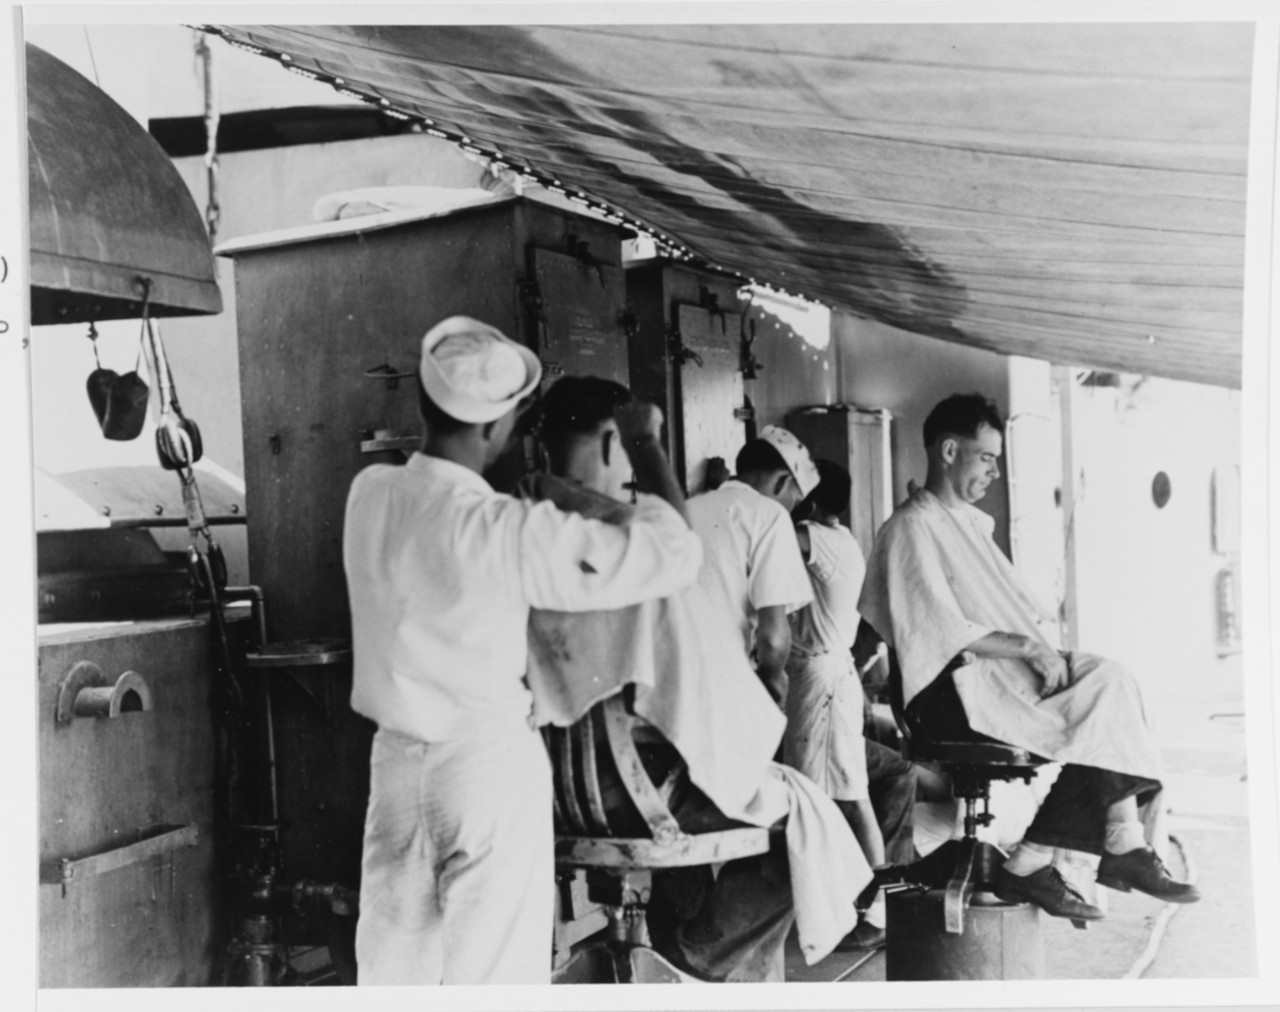 USS Marblehead (CL-12), view taken aboard ship in February 1942. Showing makeshift barbershop rigged up under an awning amidships. Shop belowdecks had been damaged during the air attack which heavily damaged the ship on 4 February 1942 in the Flores Sea.